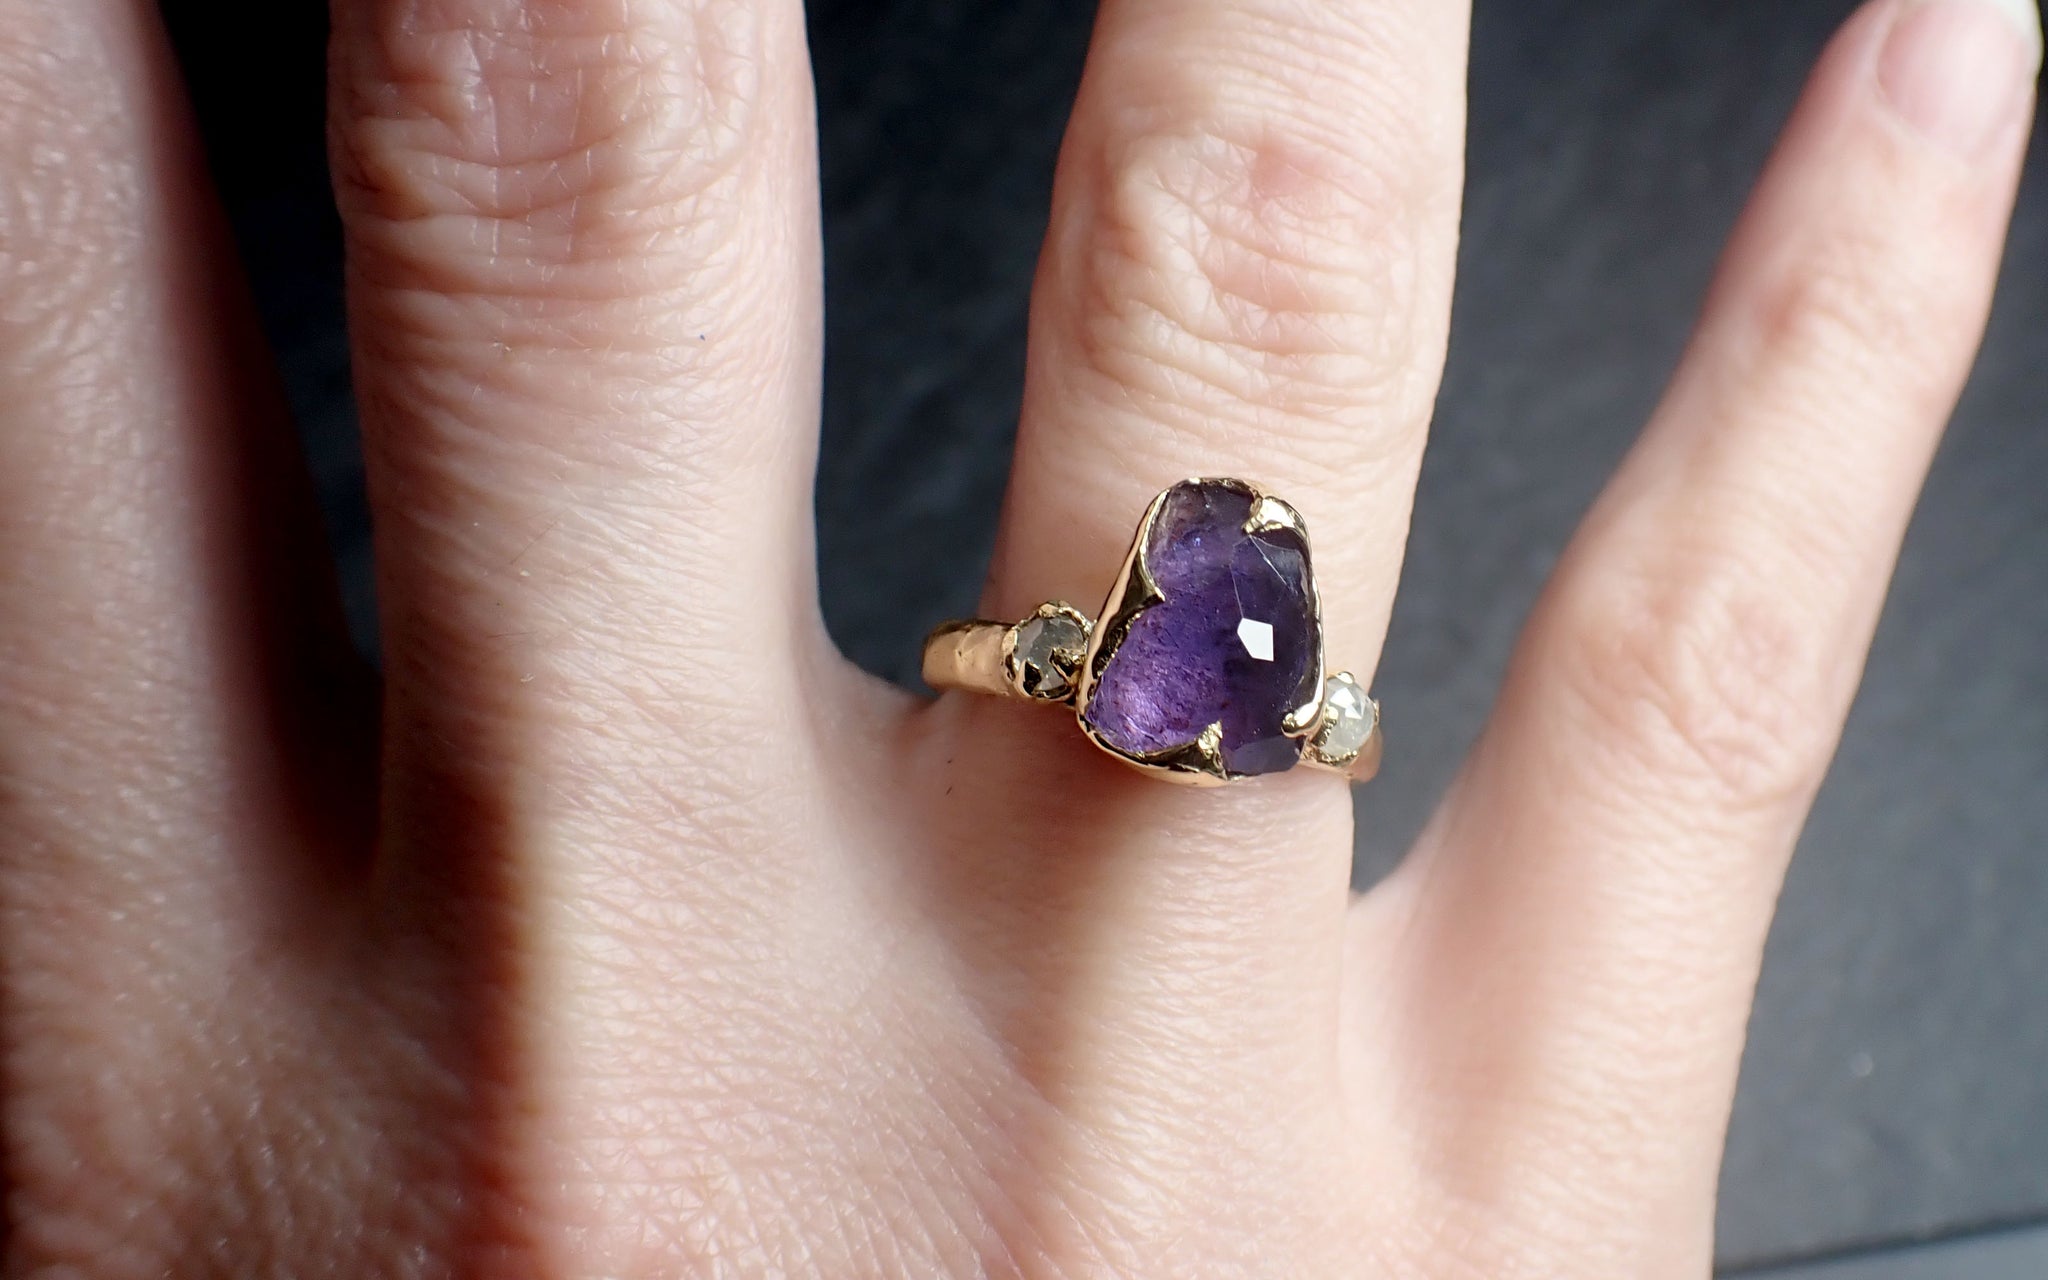 partially faceted purple sapphire 18k gold multi stone ring gold gemstone engagement ring 2513 Alternative Engagement